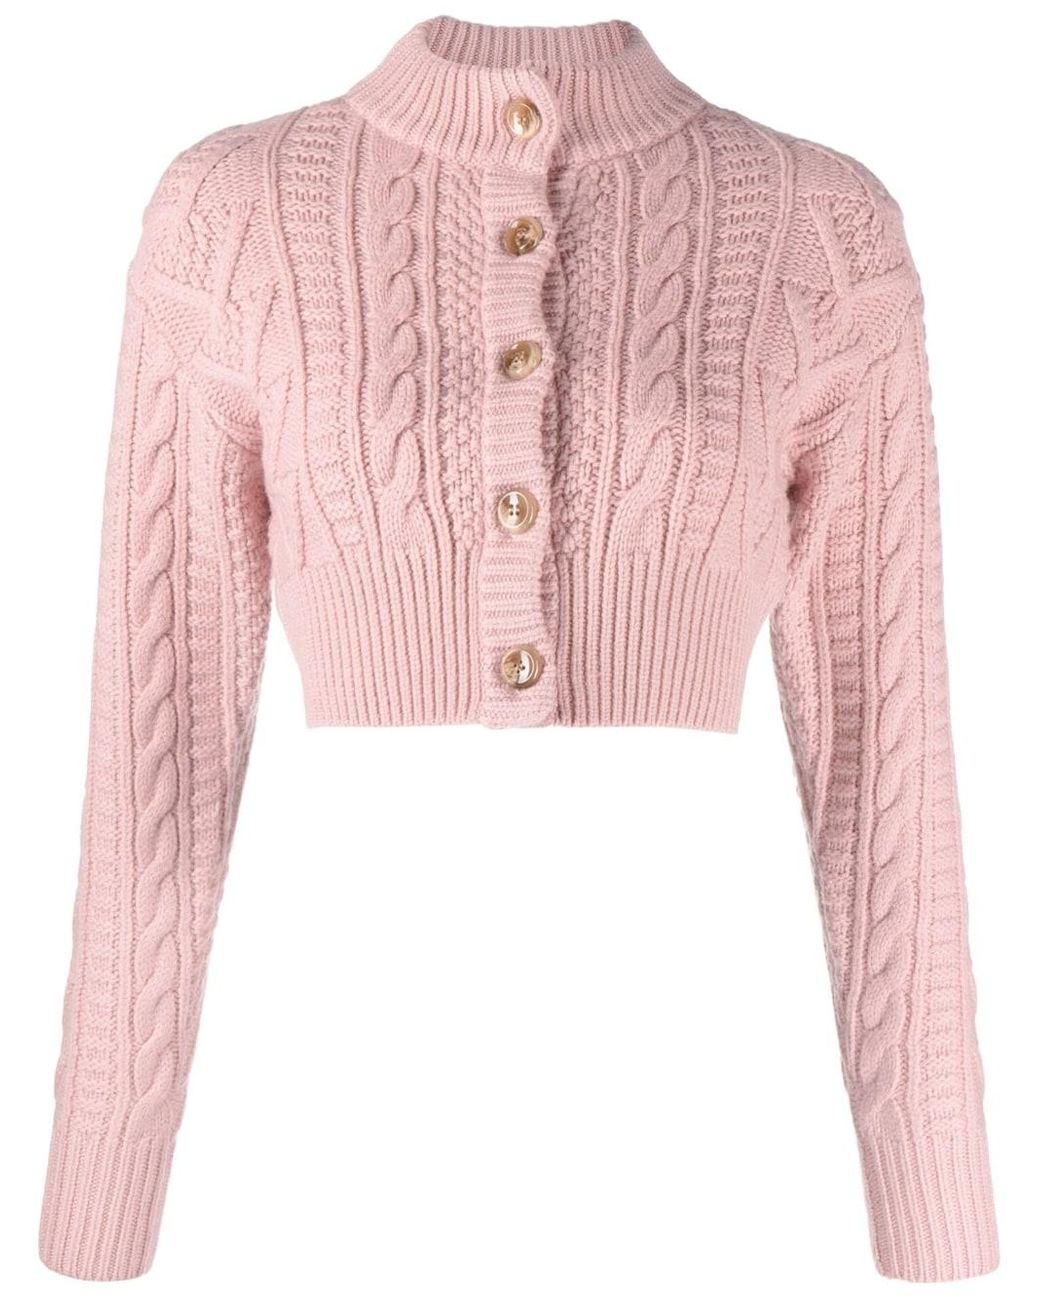 Emilia Wickstead Cable-knit Cropped Cardigan in Pink | Lyst